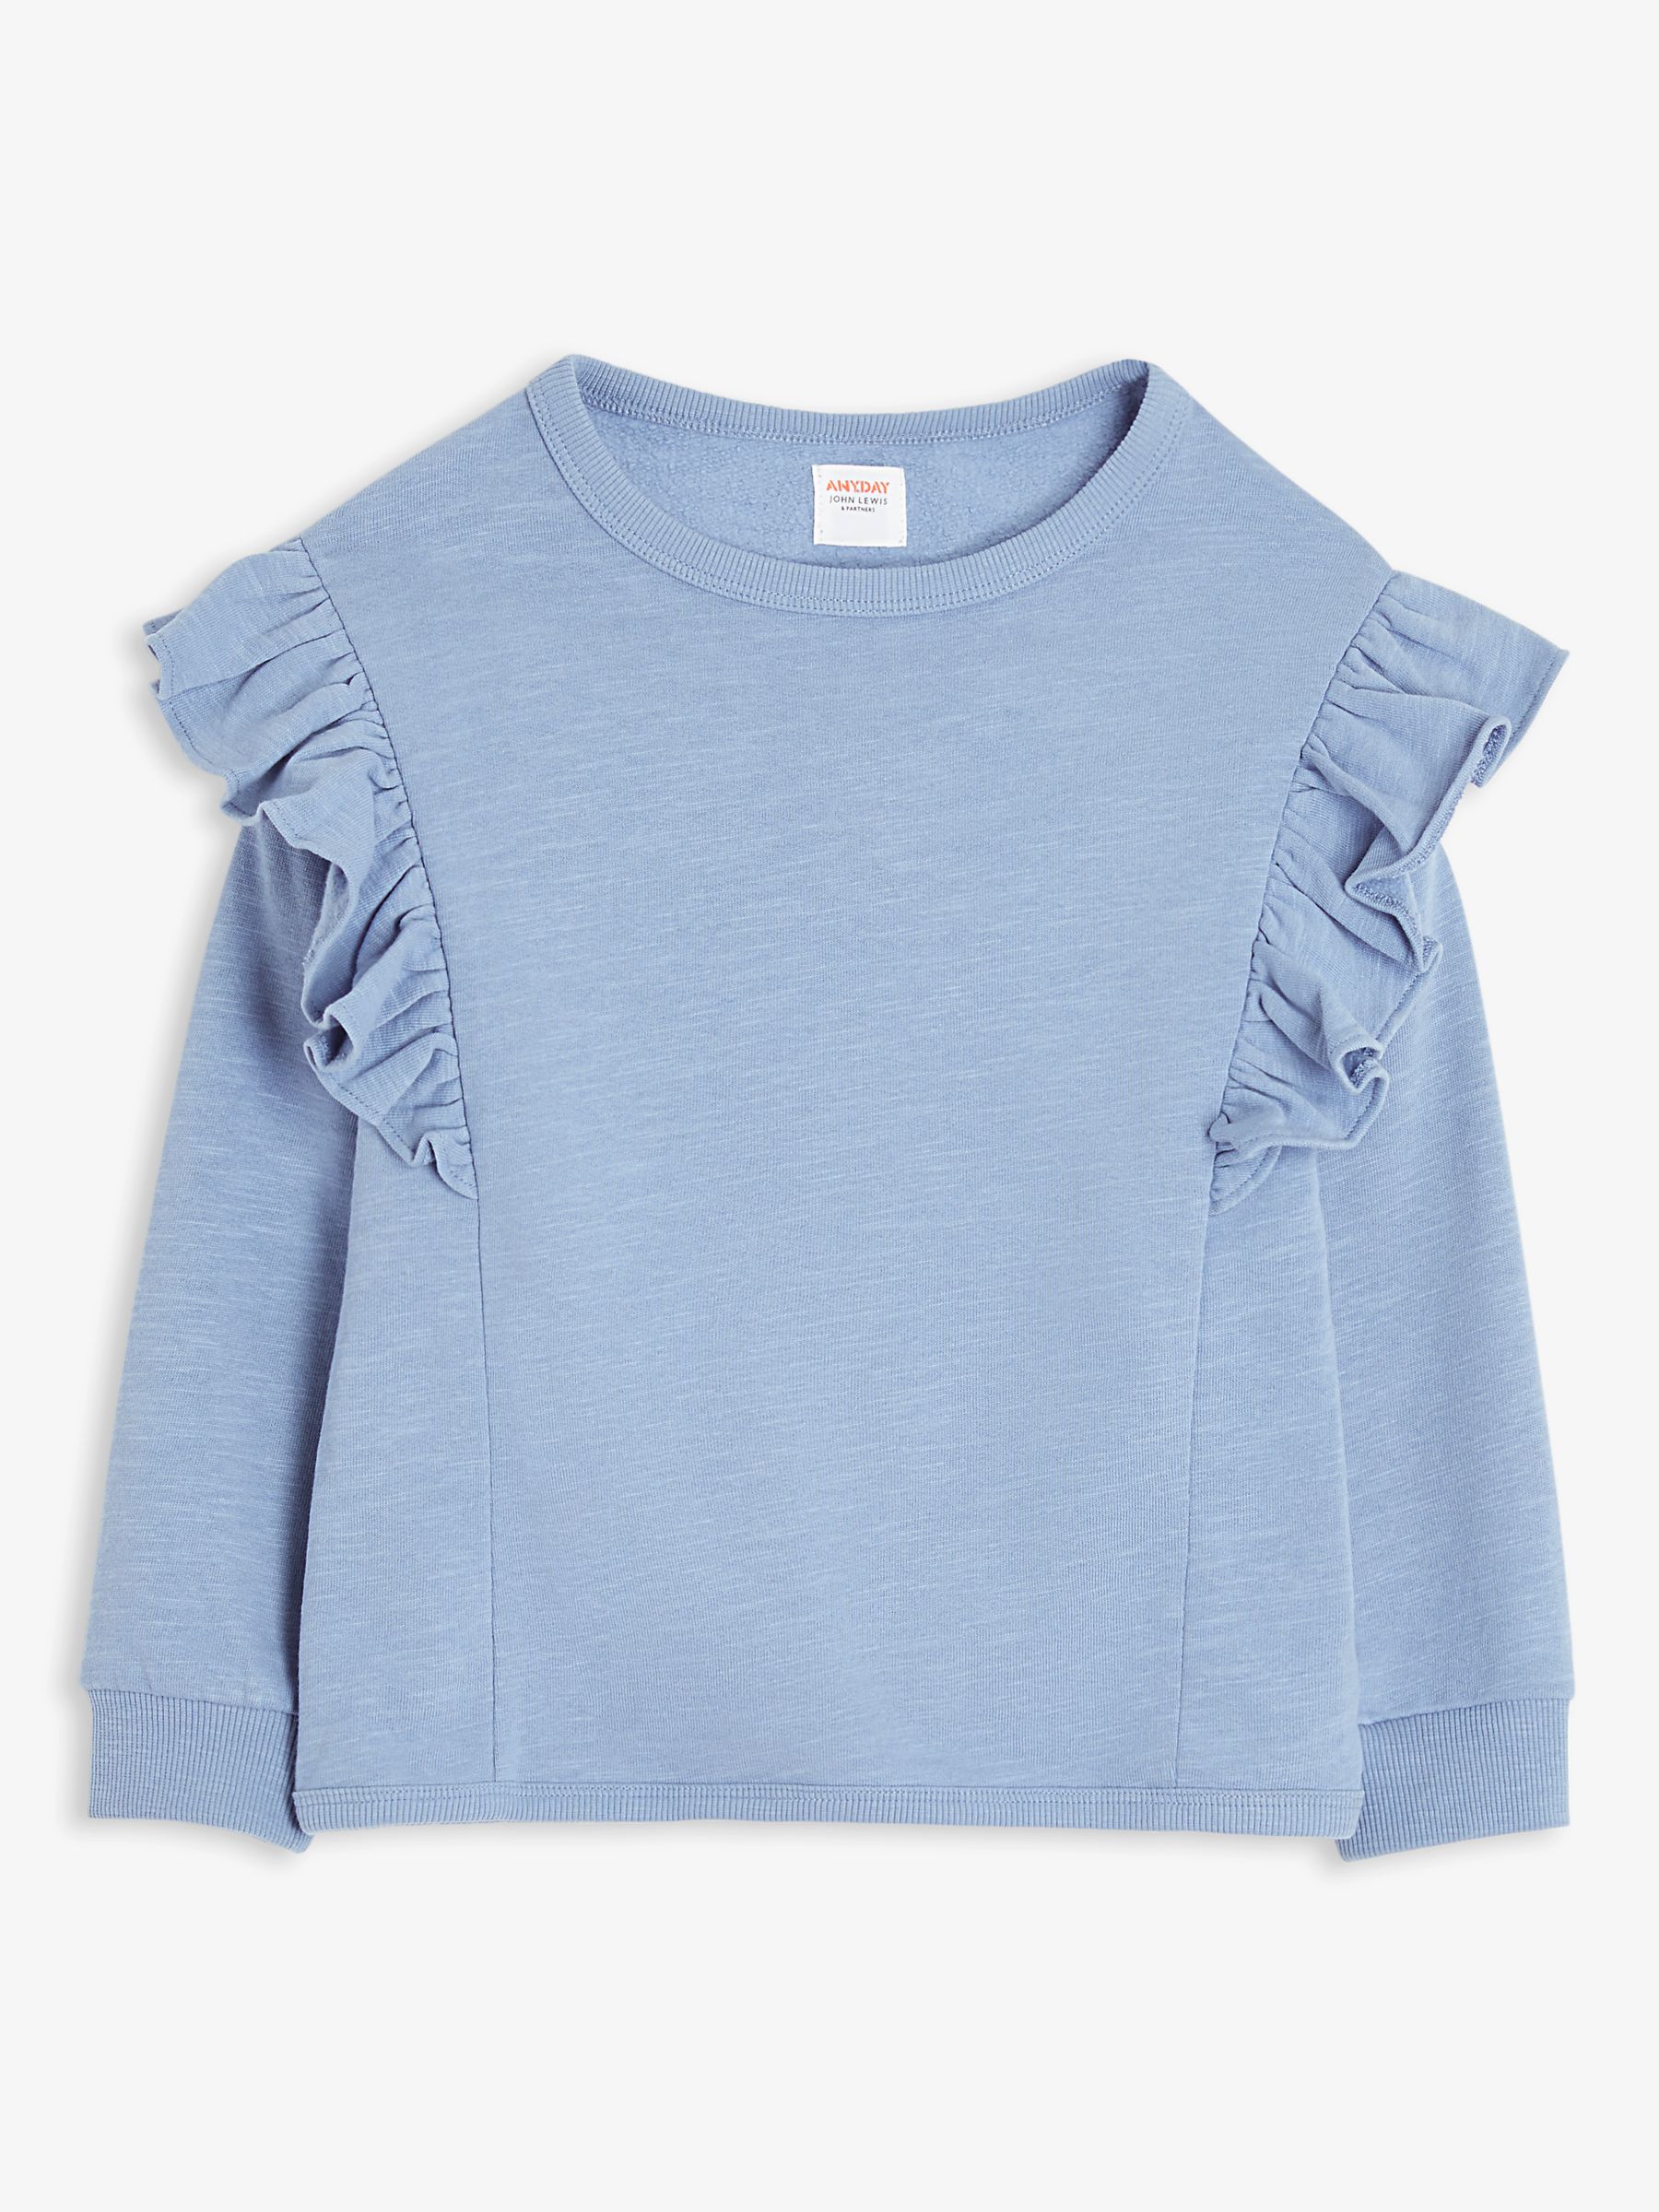 ANYDAY John Lewis & Partners Kids' Frill Sweater